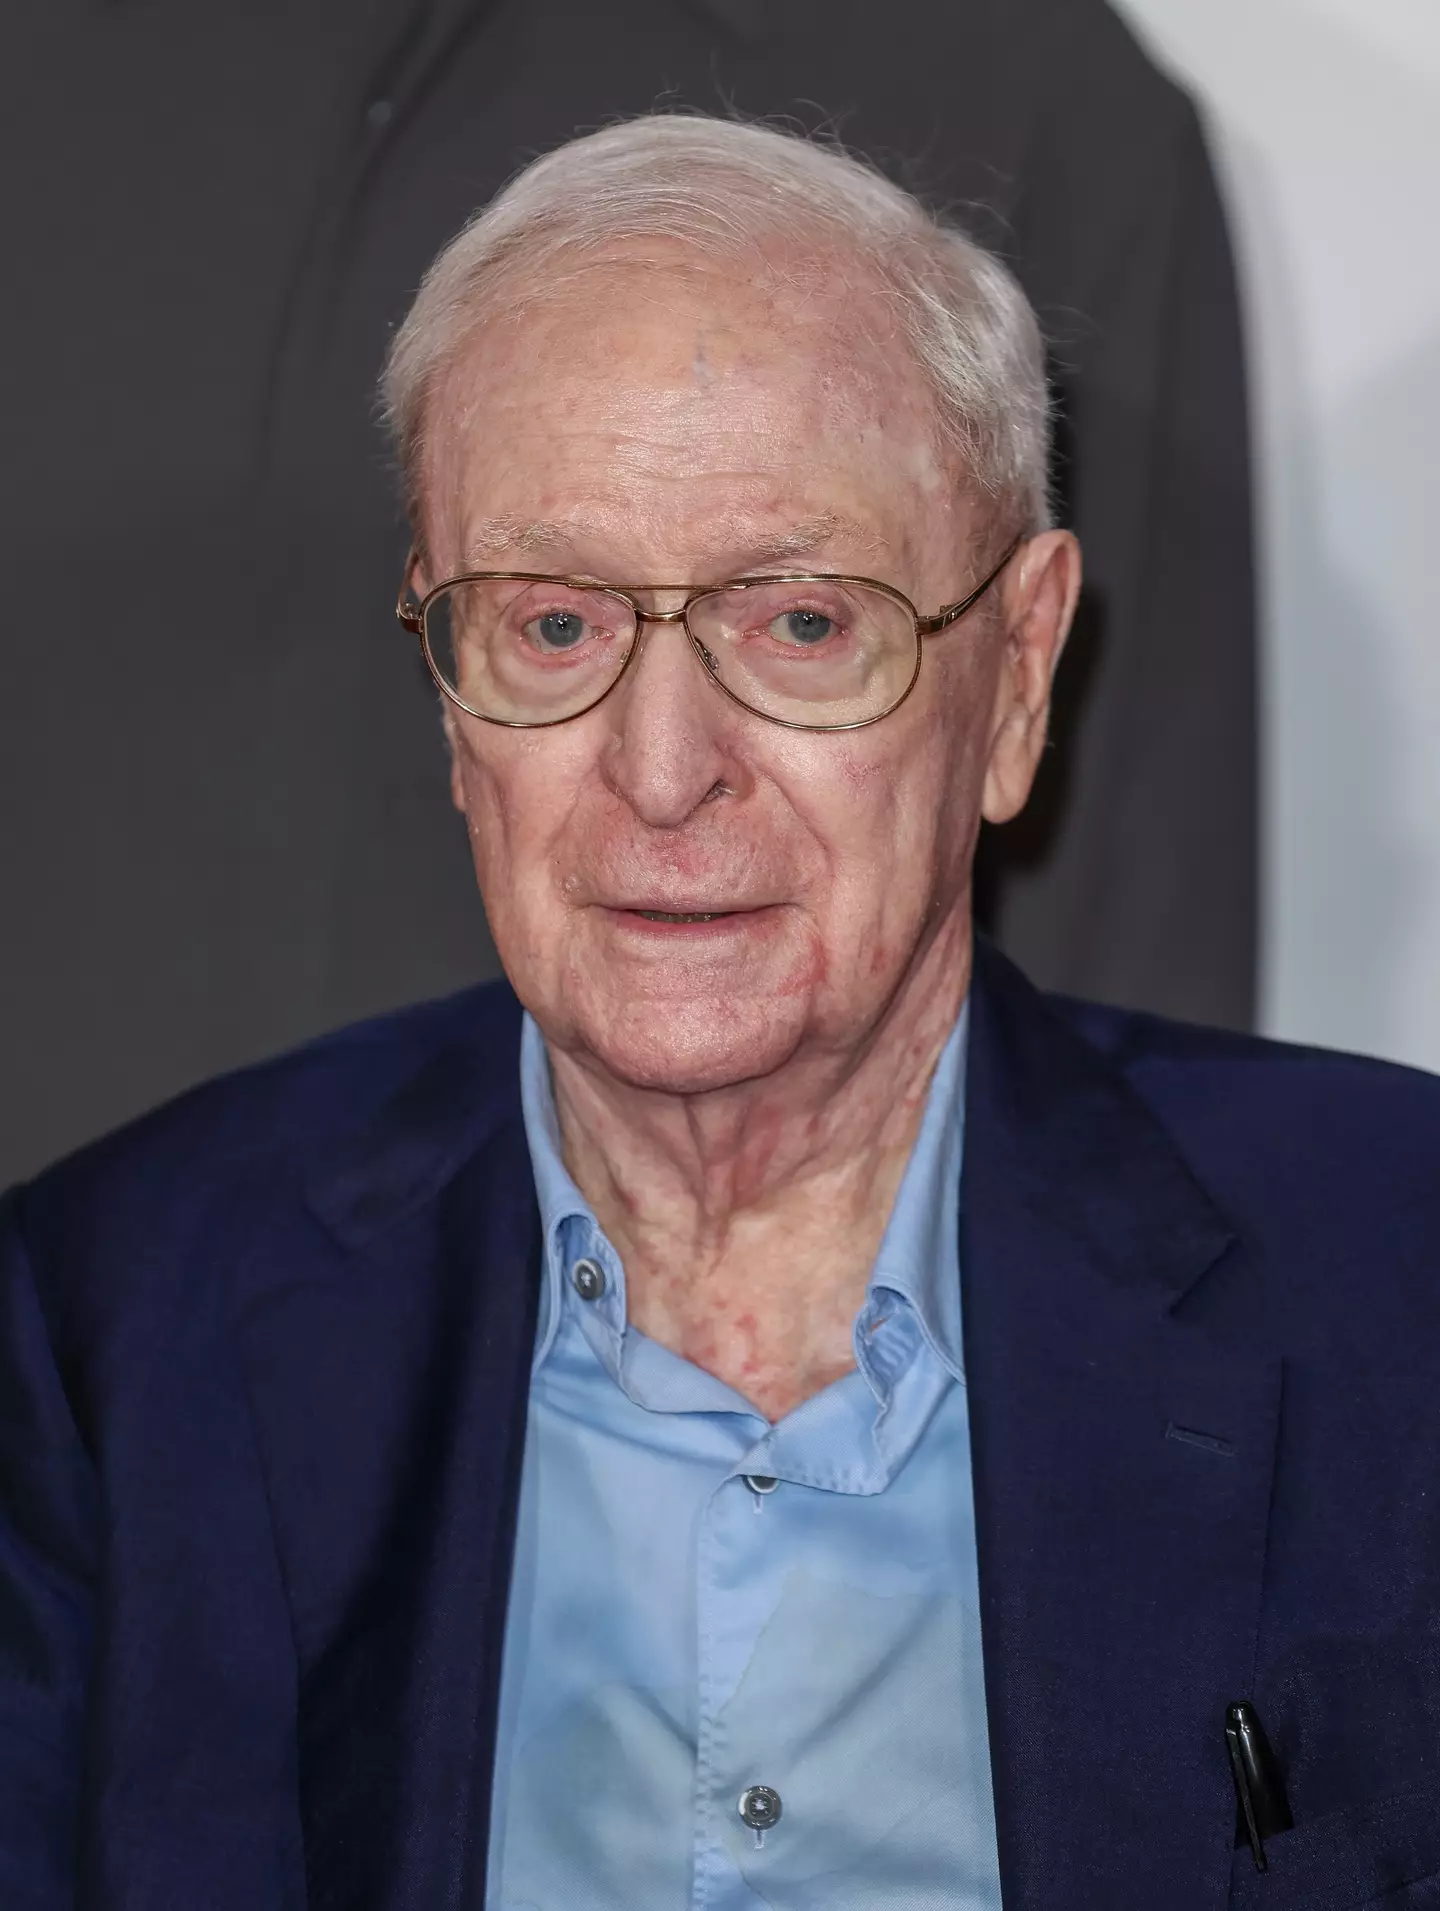 Michael Caine, 90, says the secret to a long life is 'younger wives